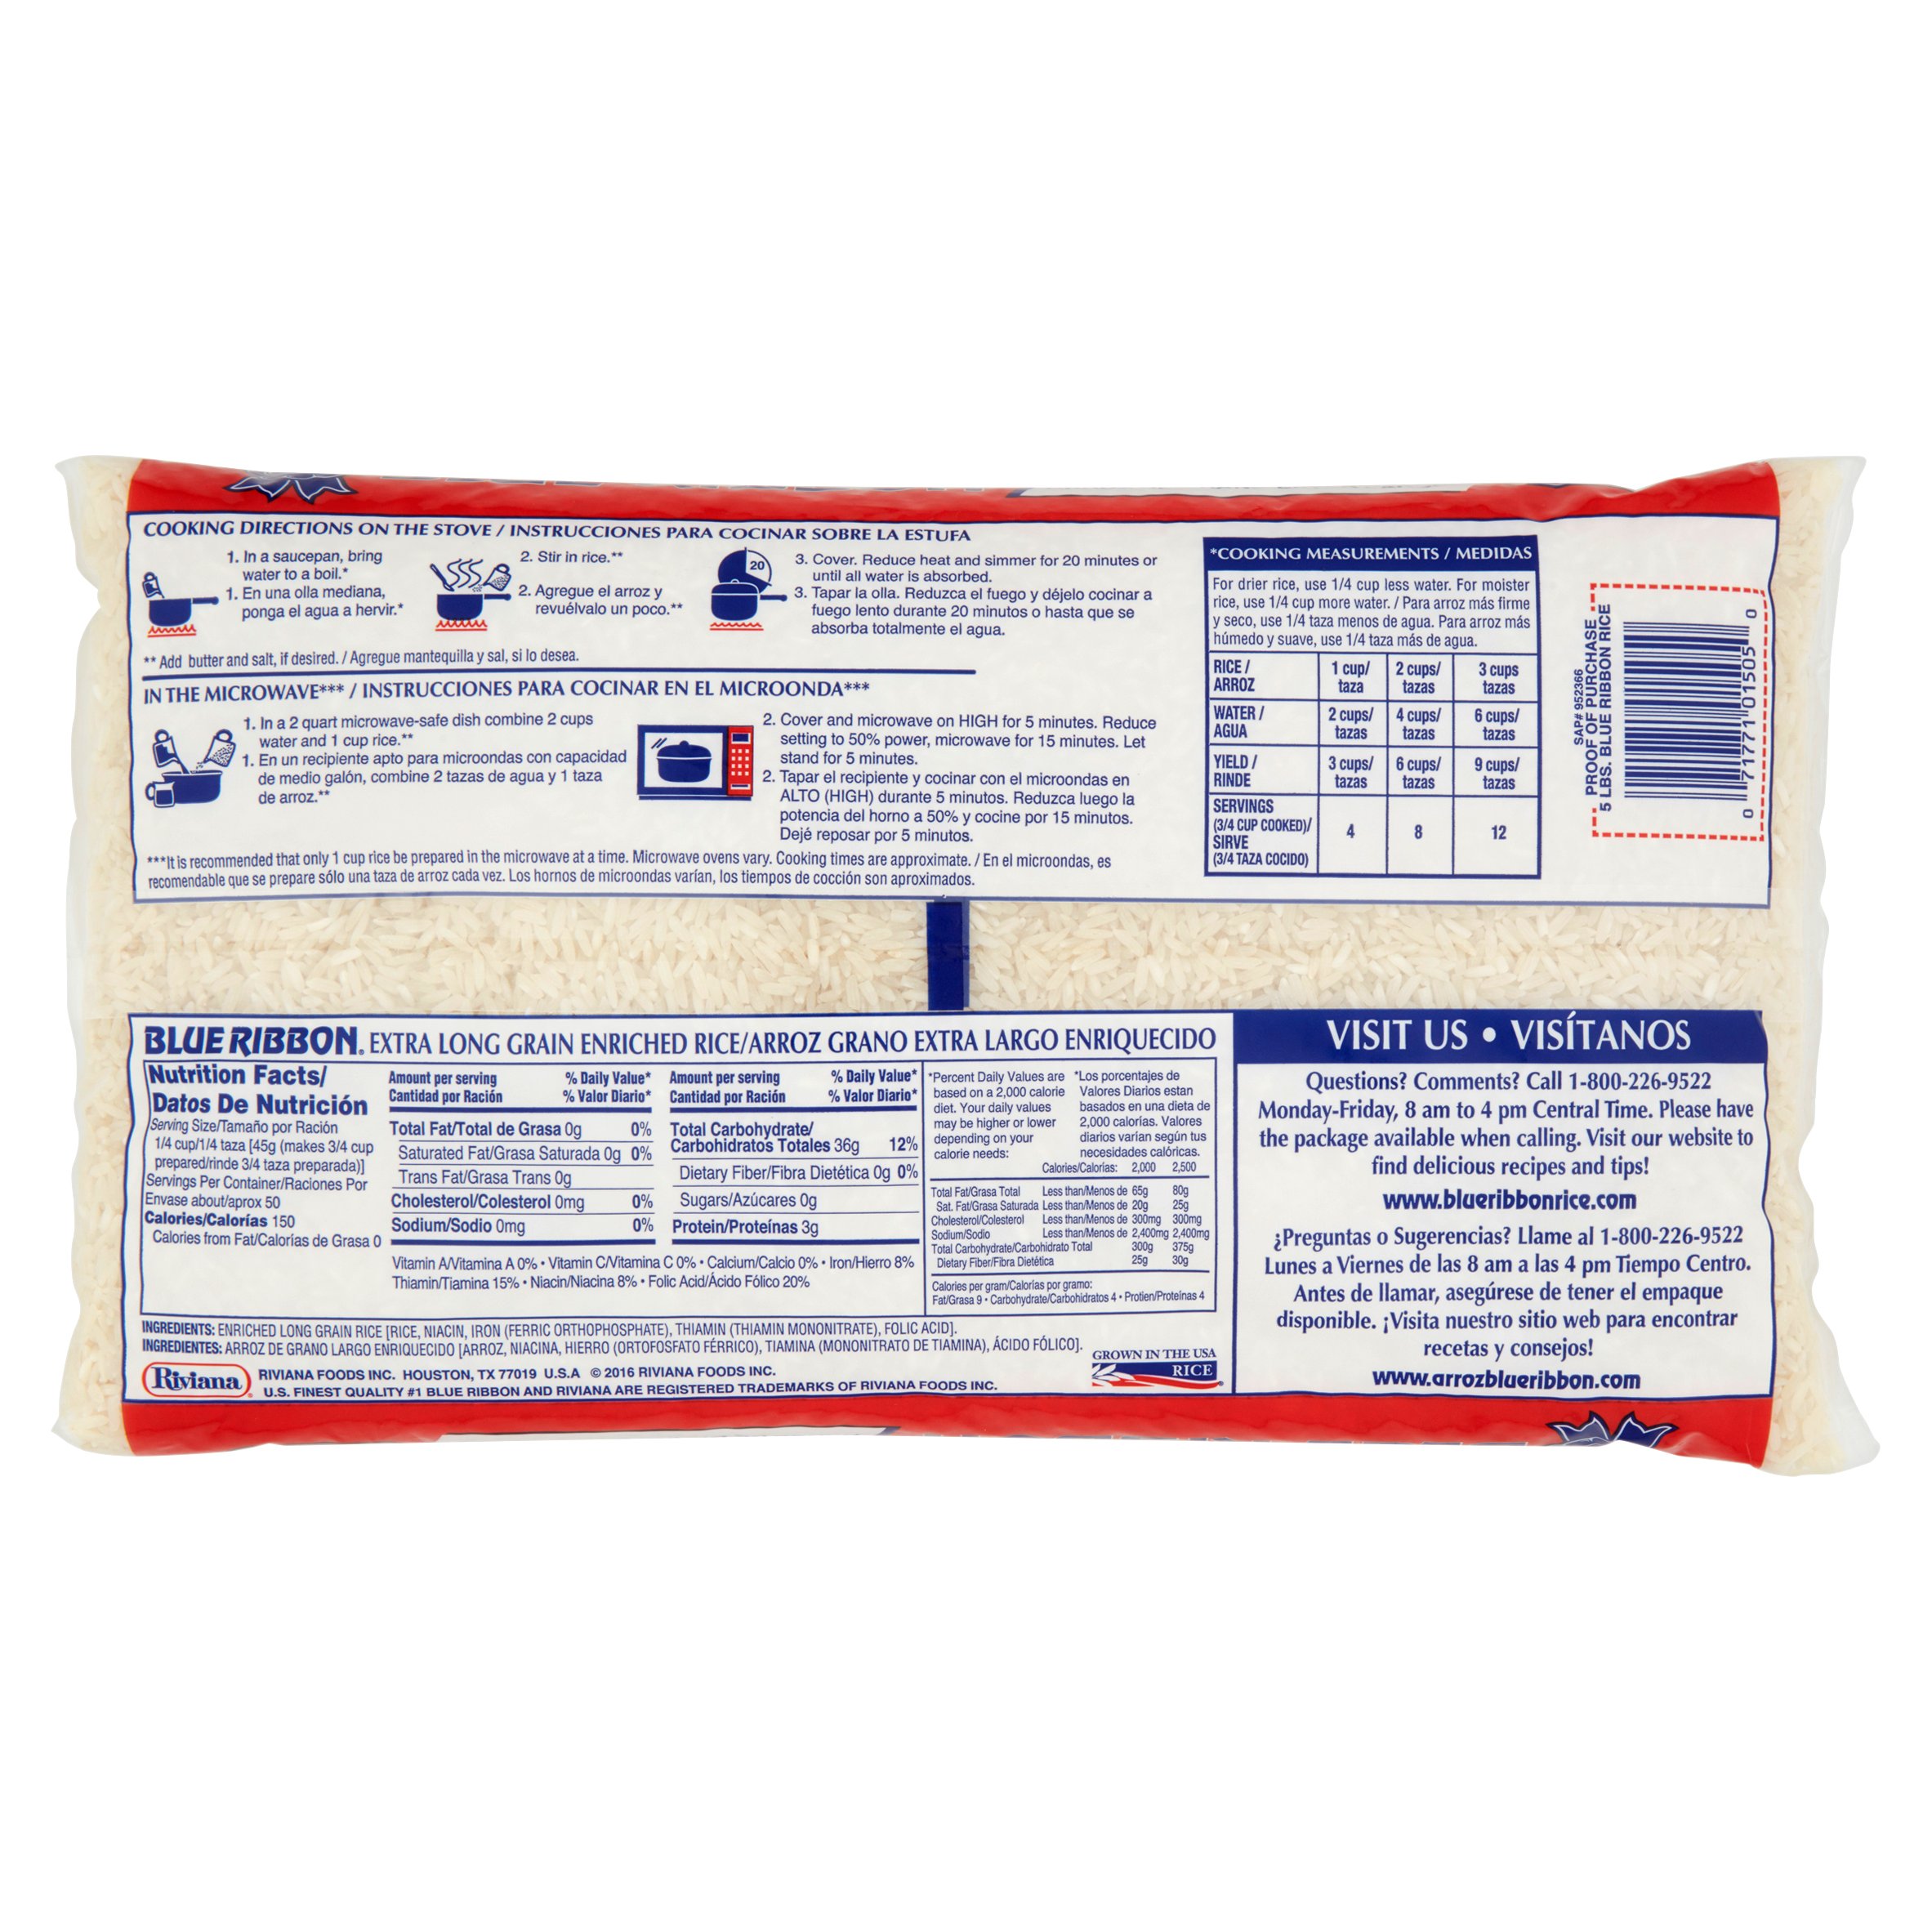 Blue Ribbon White Rice, Extra Long Grain Enriched Rice, 5 lb Bag - image 2 of 5